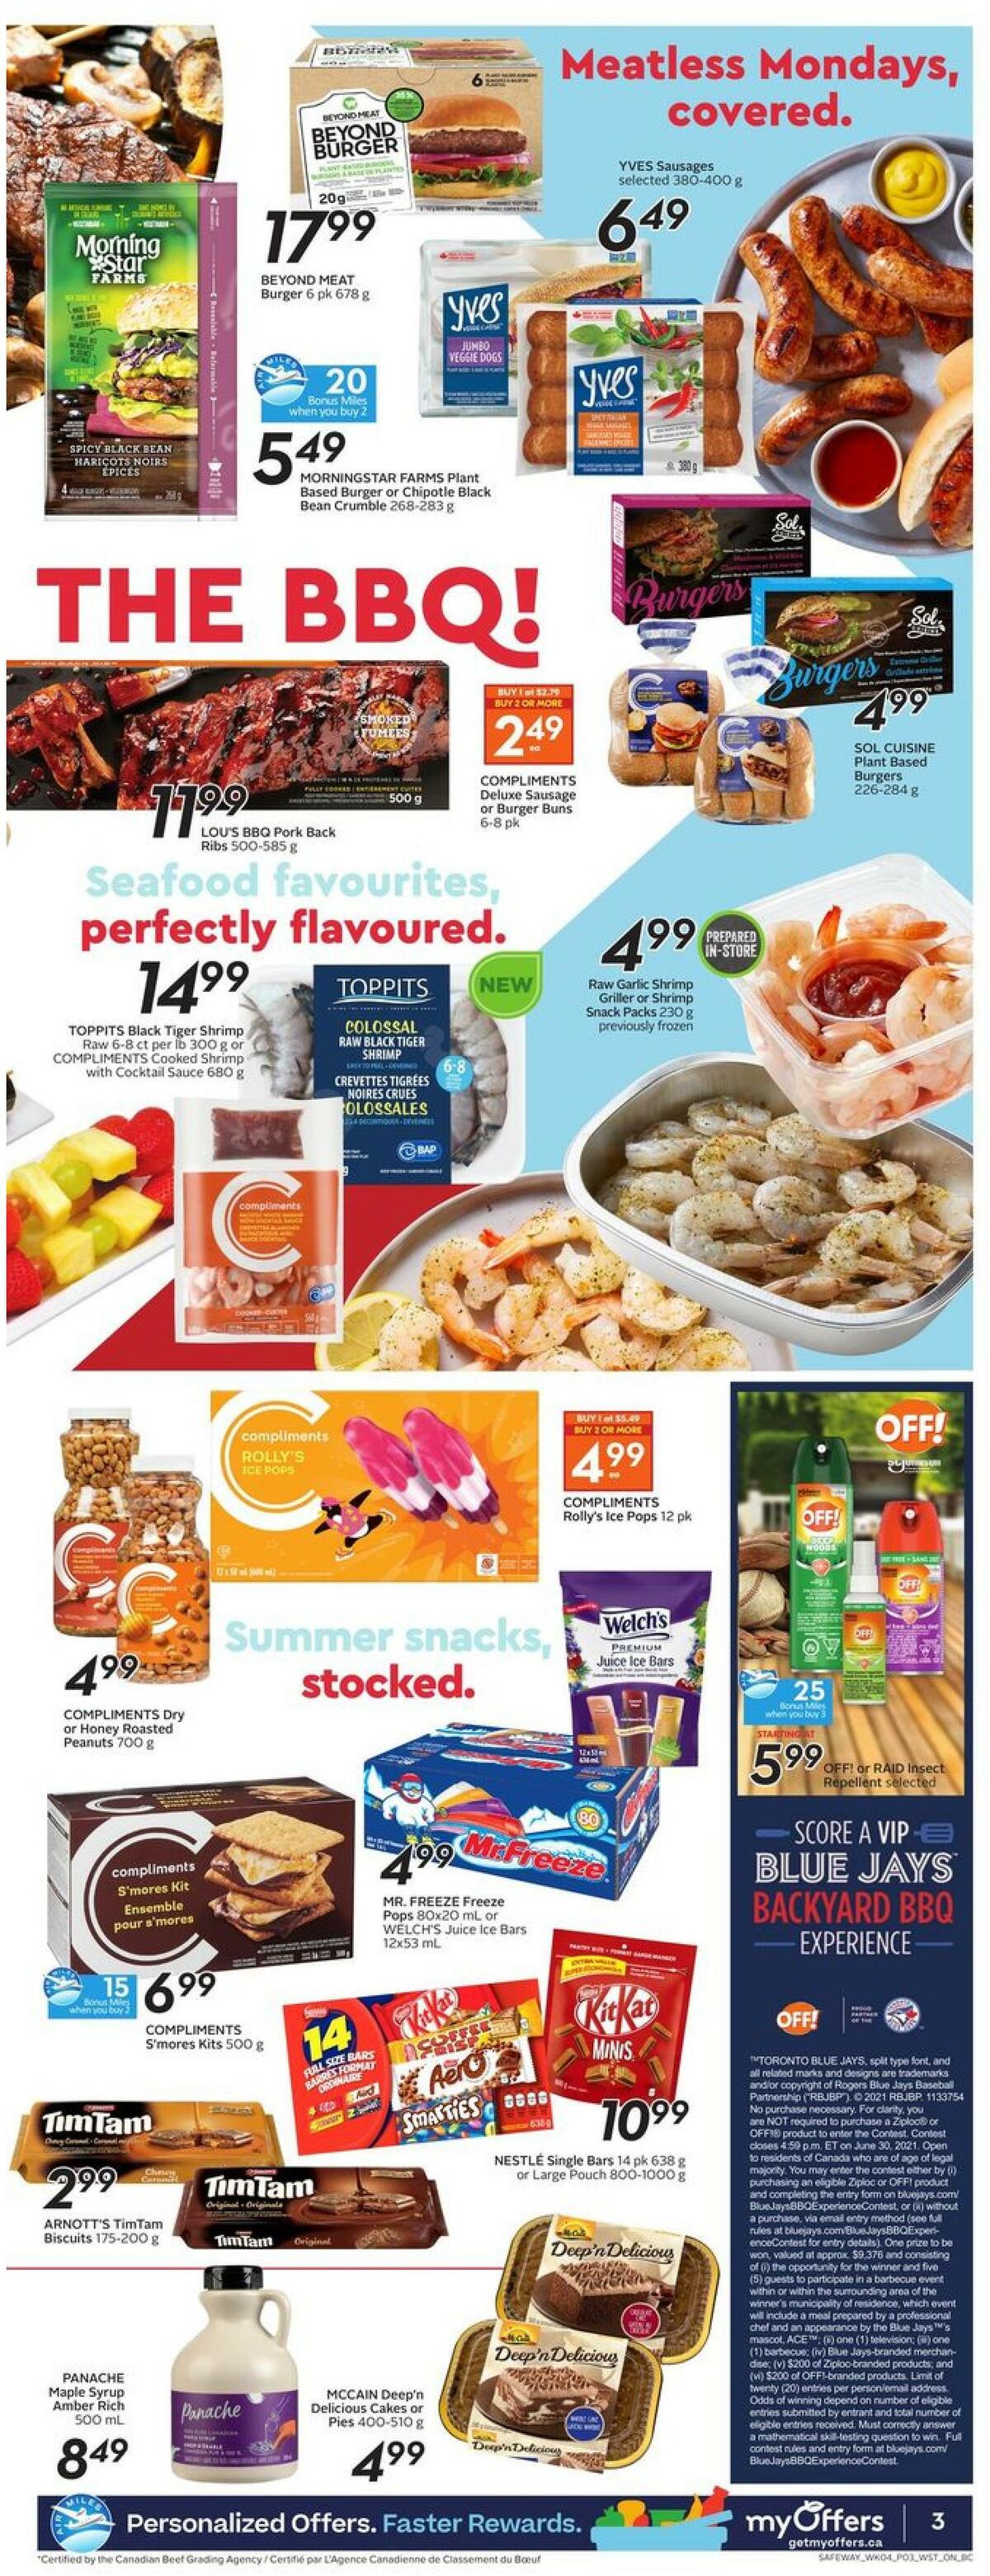 Safeway Flyer from May 20